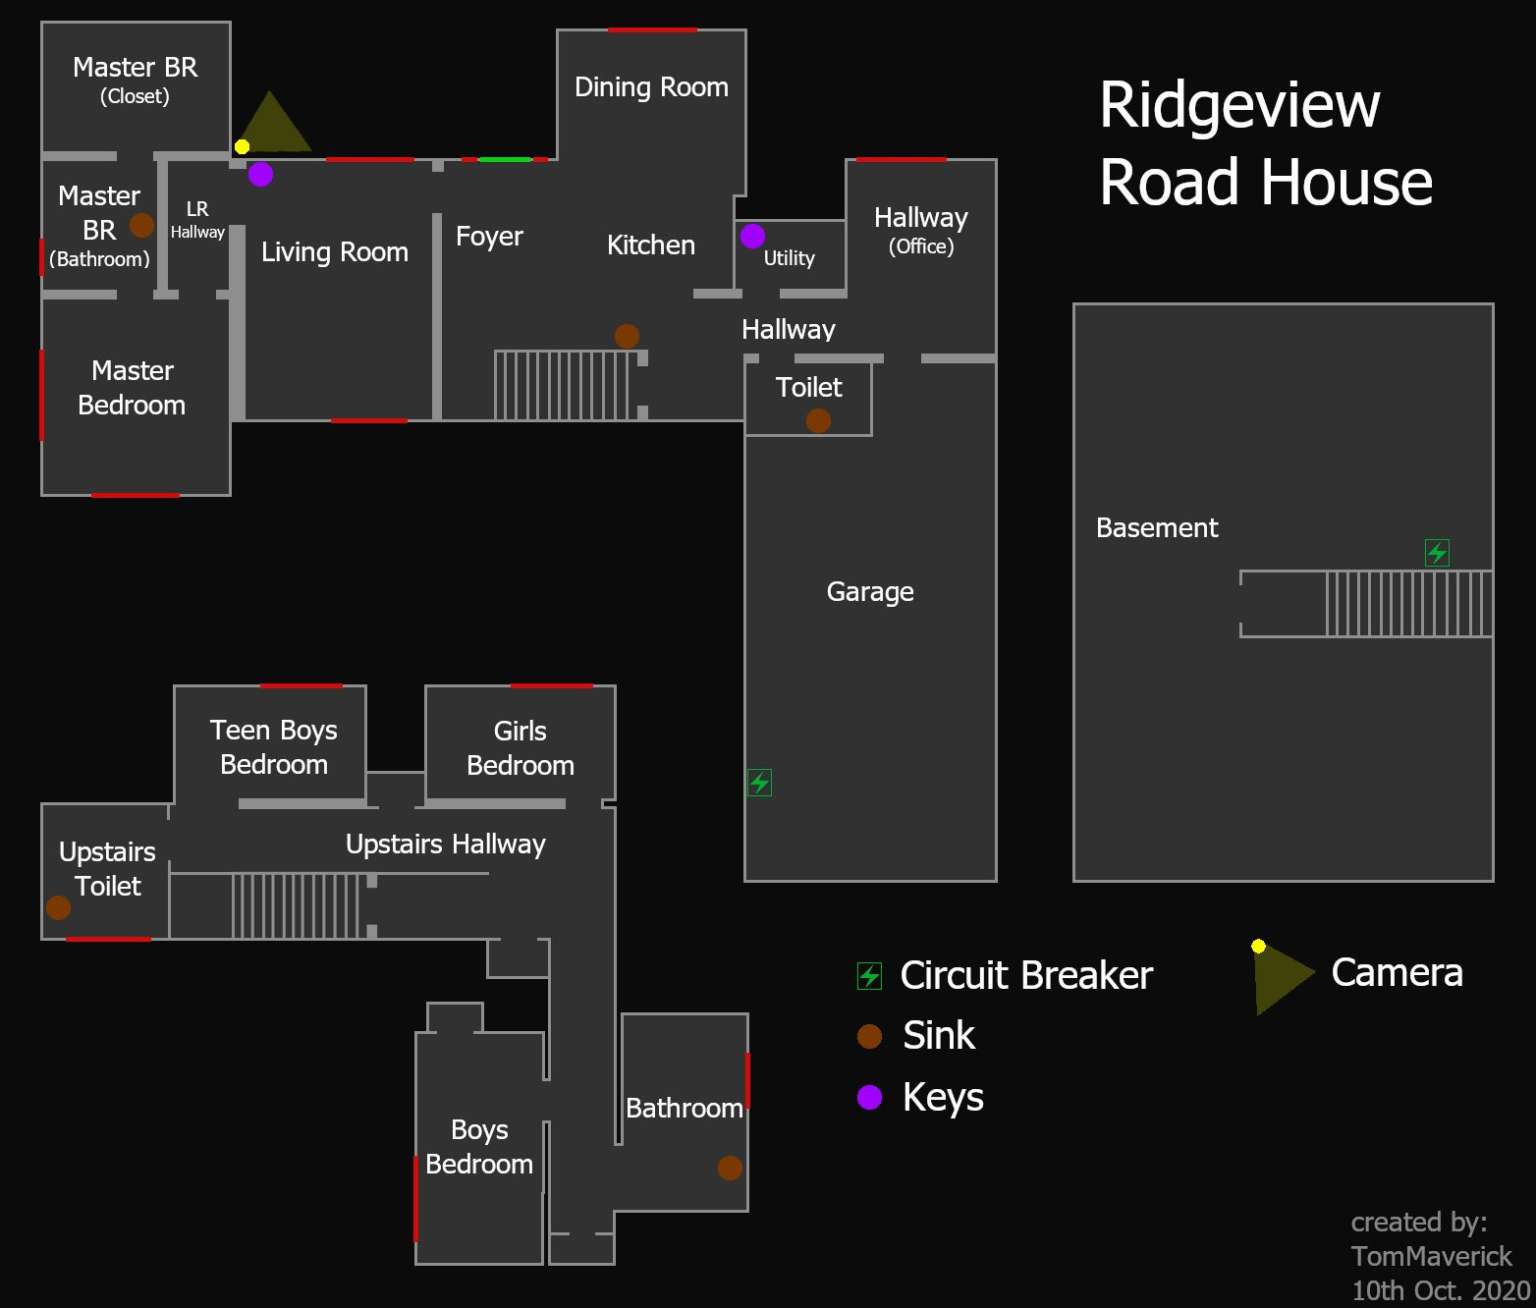 2251267947 Preview RidgeviewRoadHouse Map 1536x1308 